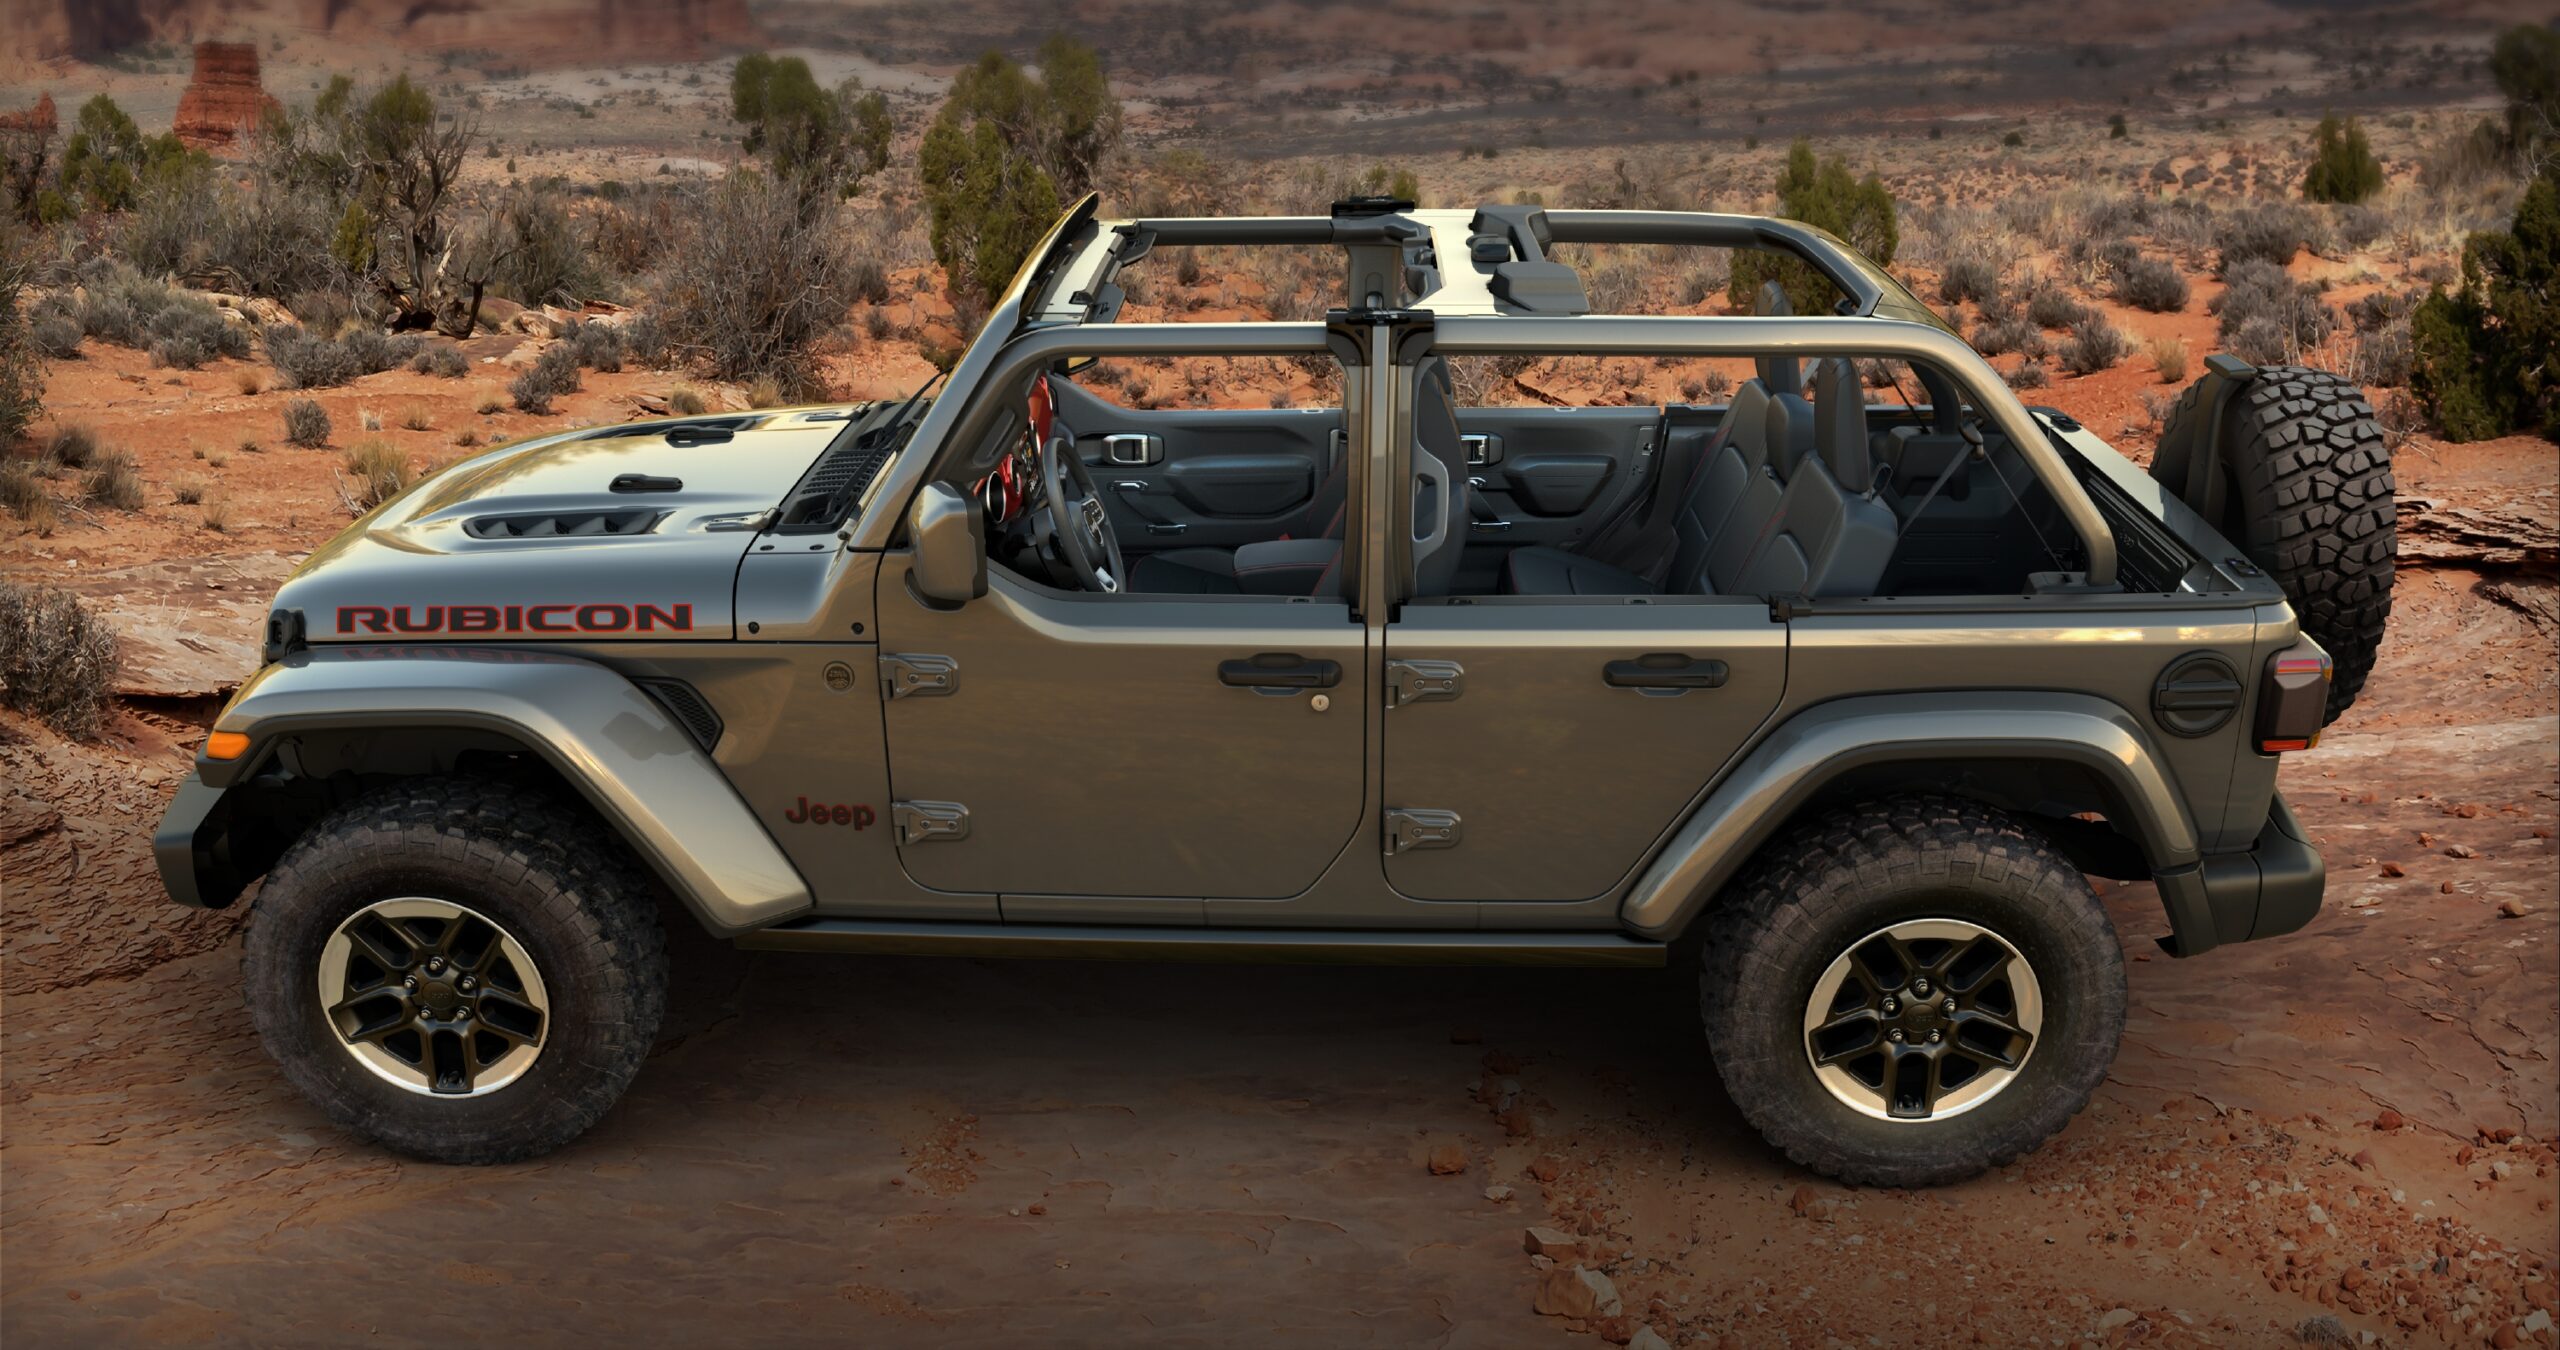 Half Doors For Jeep Wrangler Introduced - Elating Up The Cool Quotient!